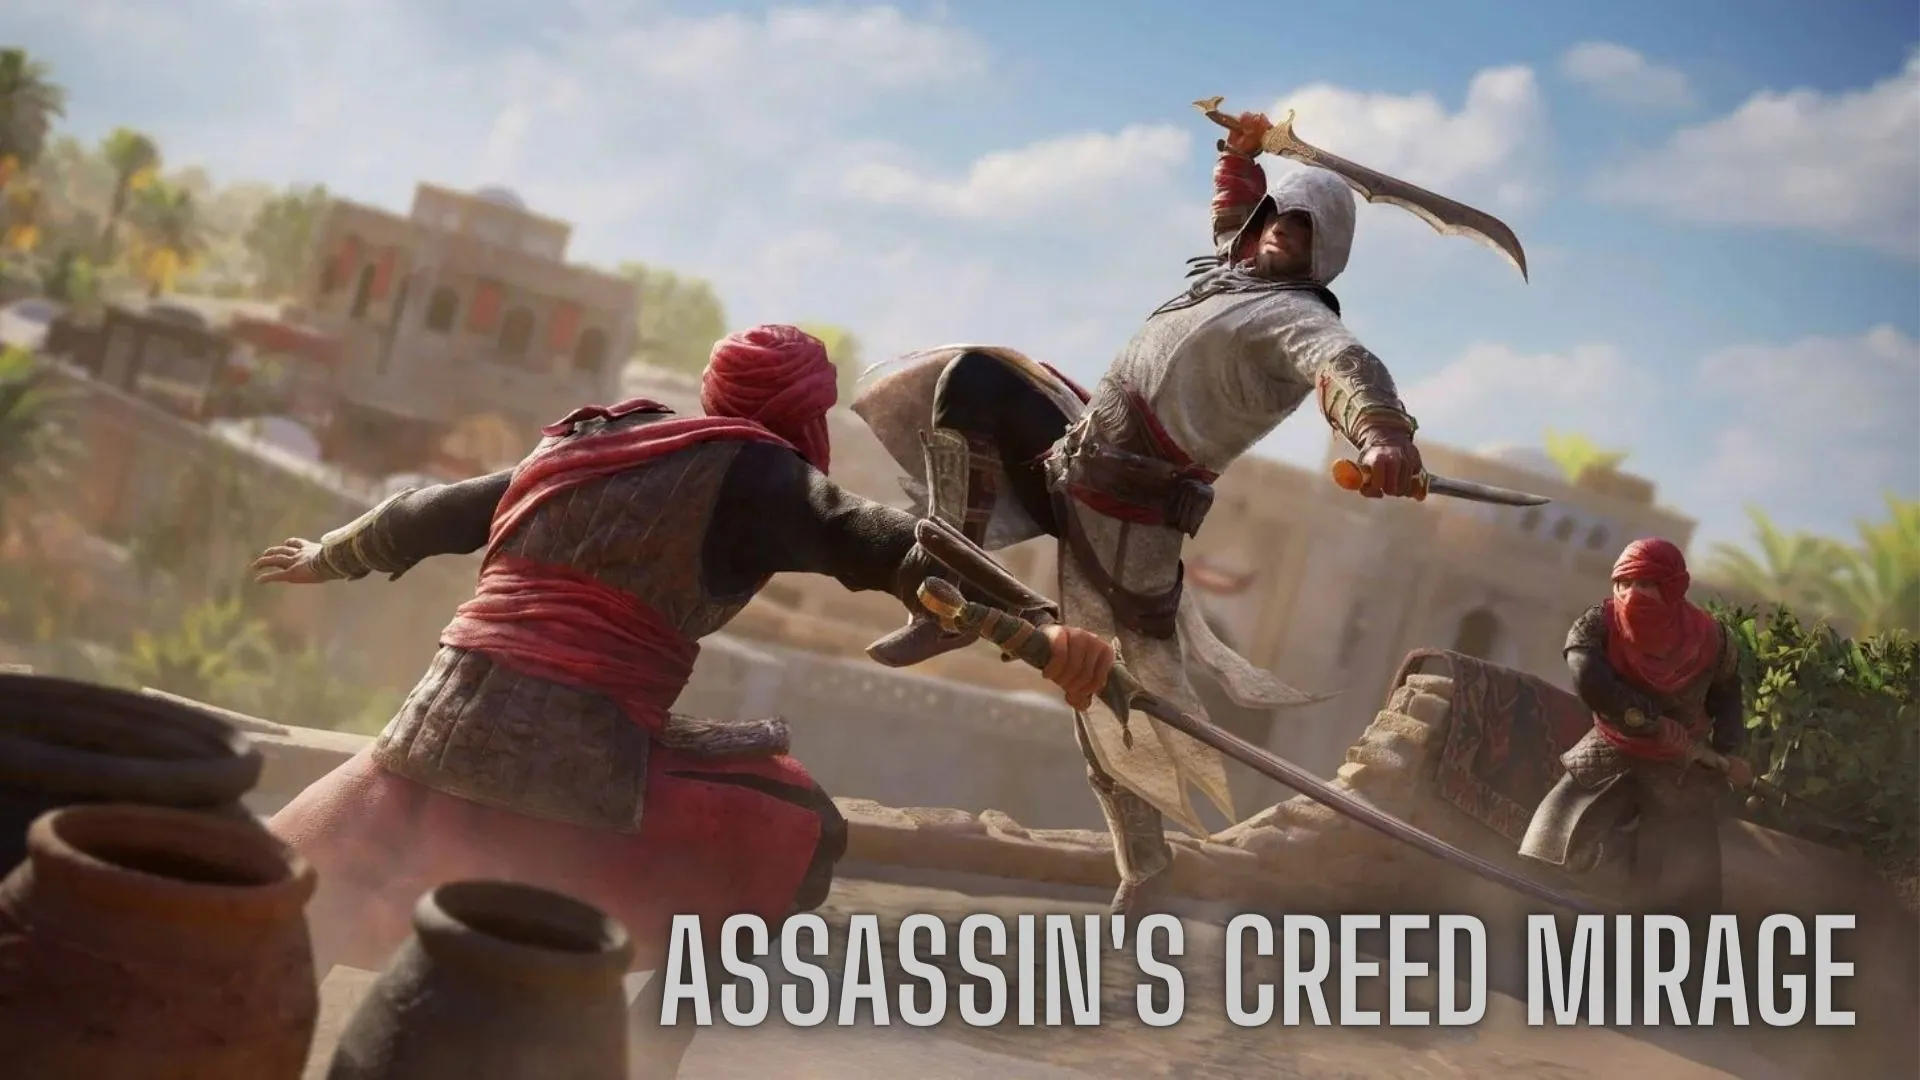 Assassin's Creed Mirage Parents Guide and Age Rating (2023)